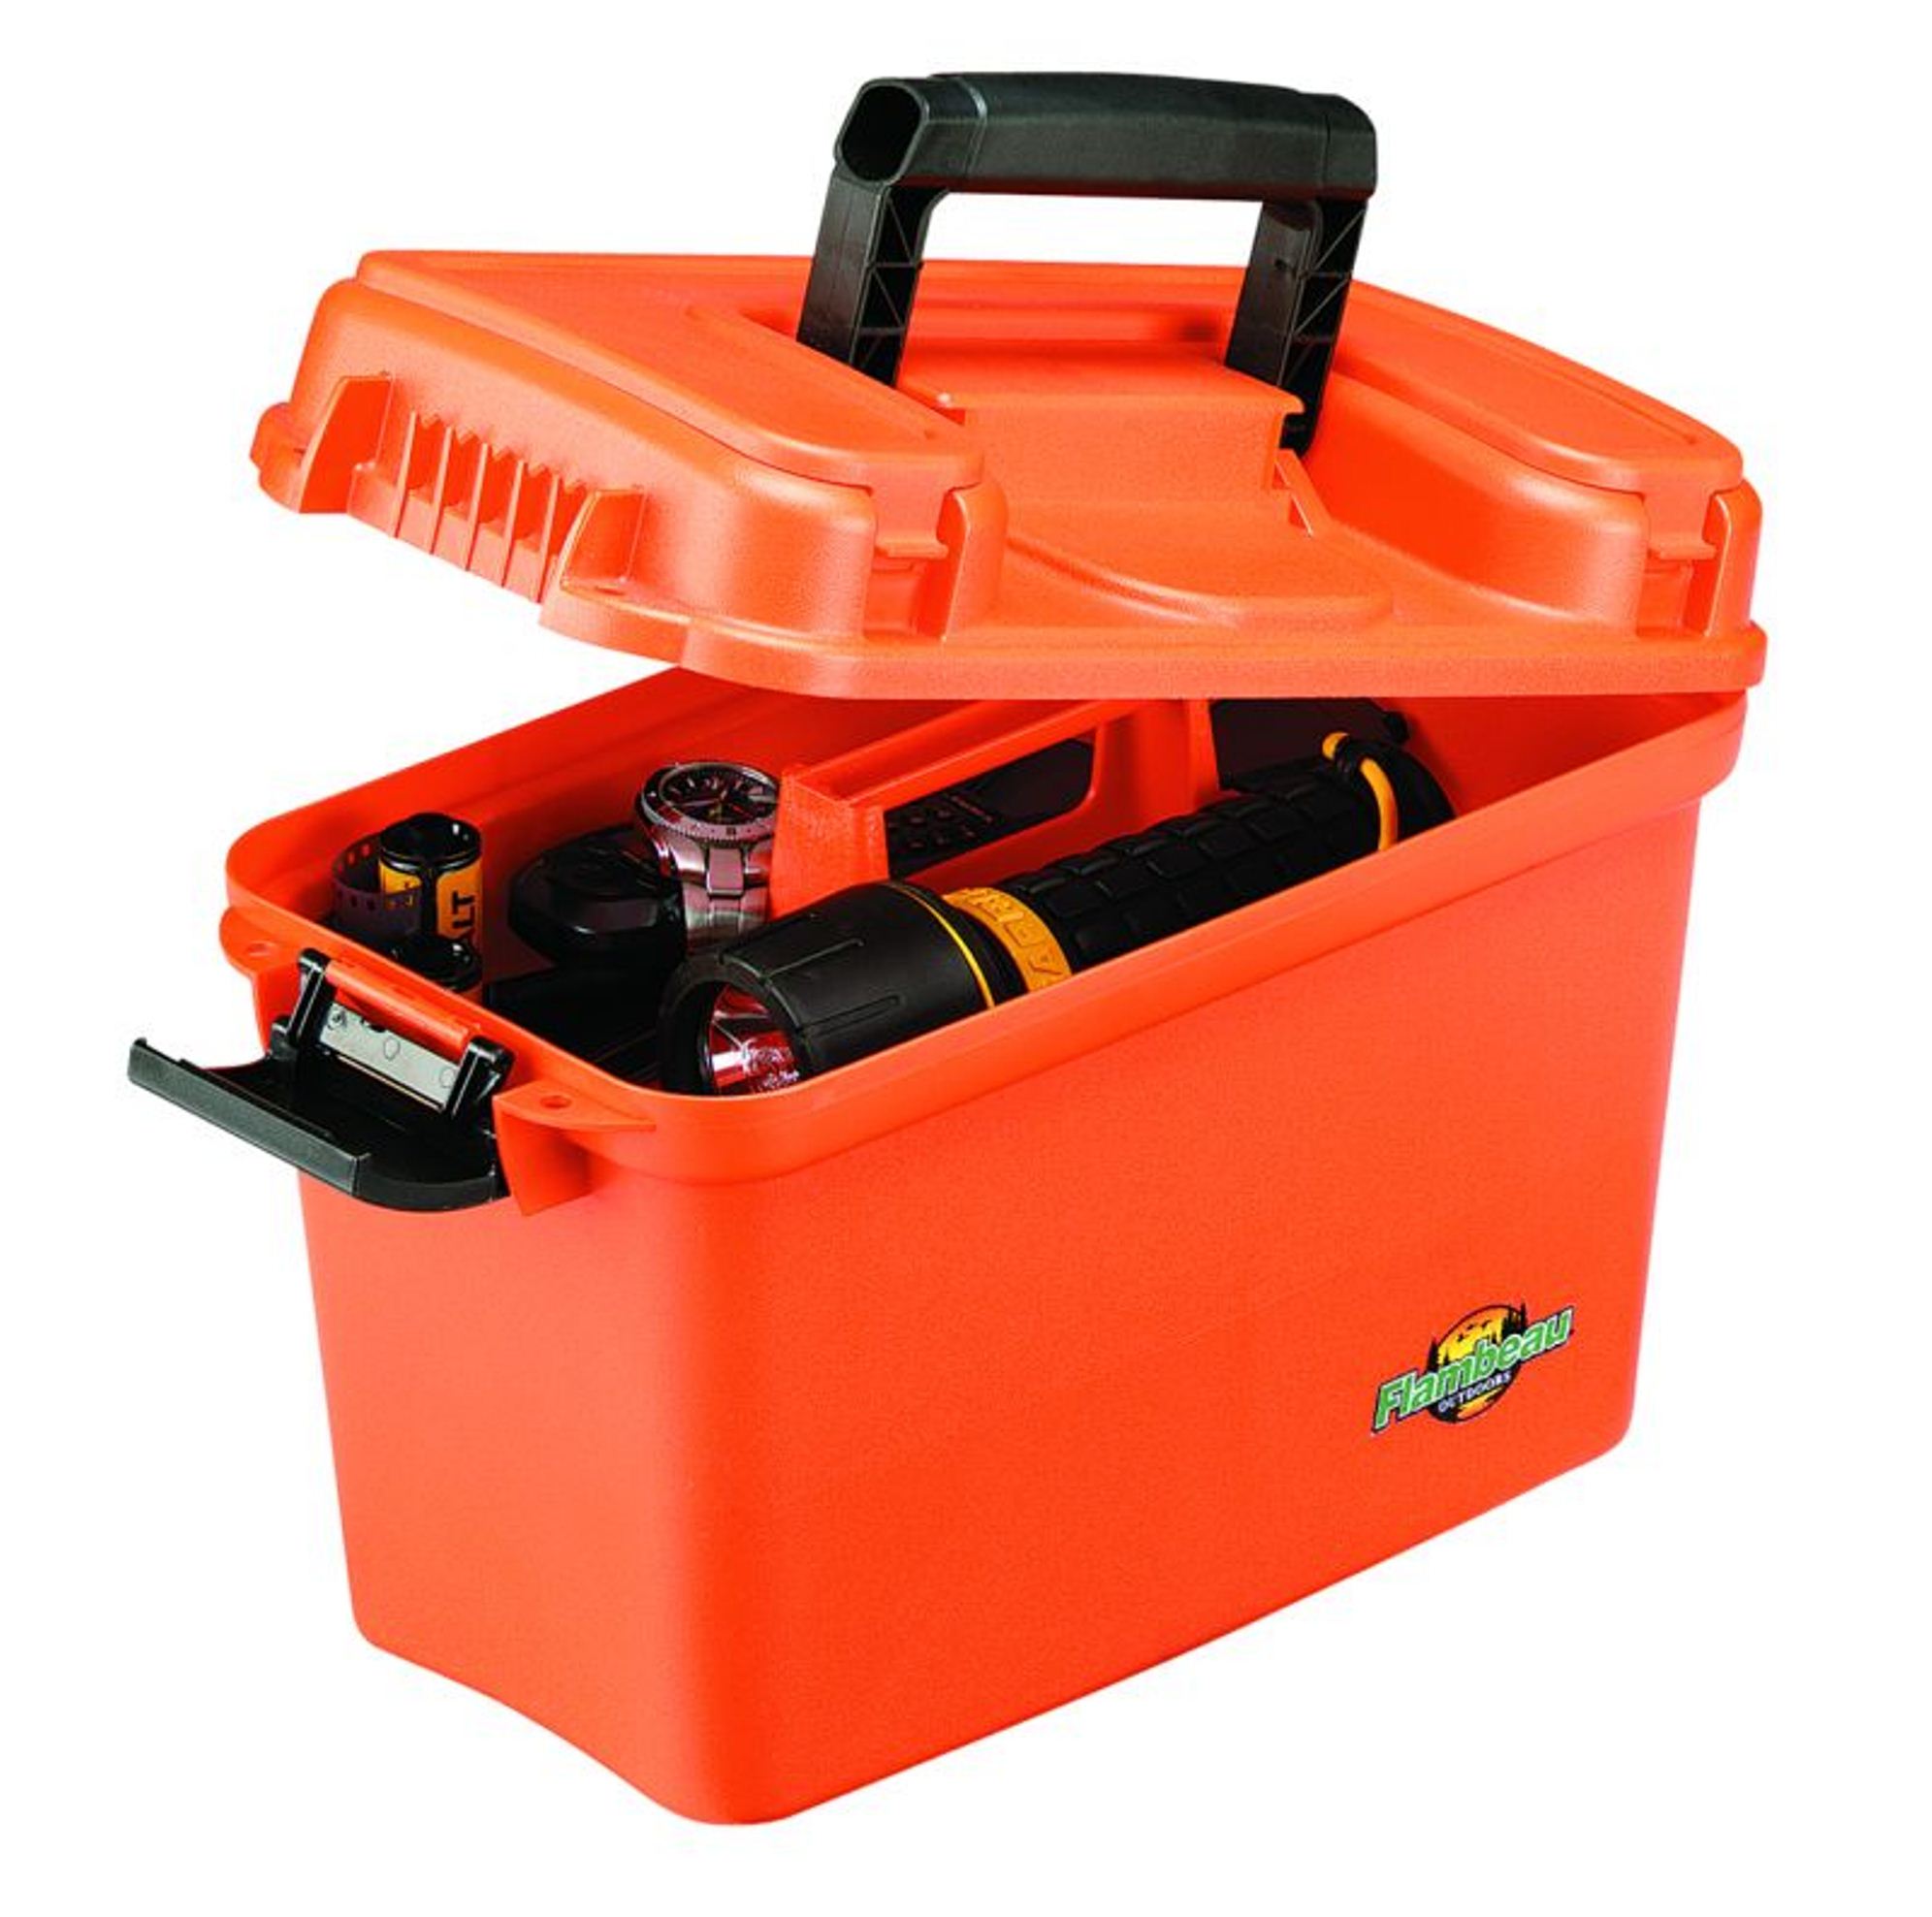 Flambeau Orange Water Resistant Dry Box with Flip Top Lid - 15.13 Inches x 7.88 Inches